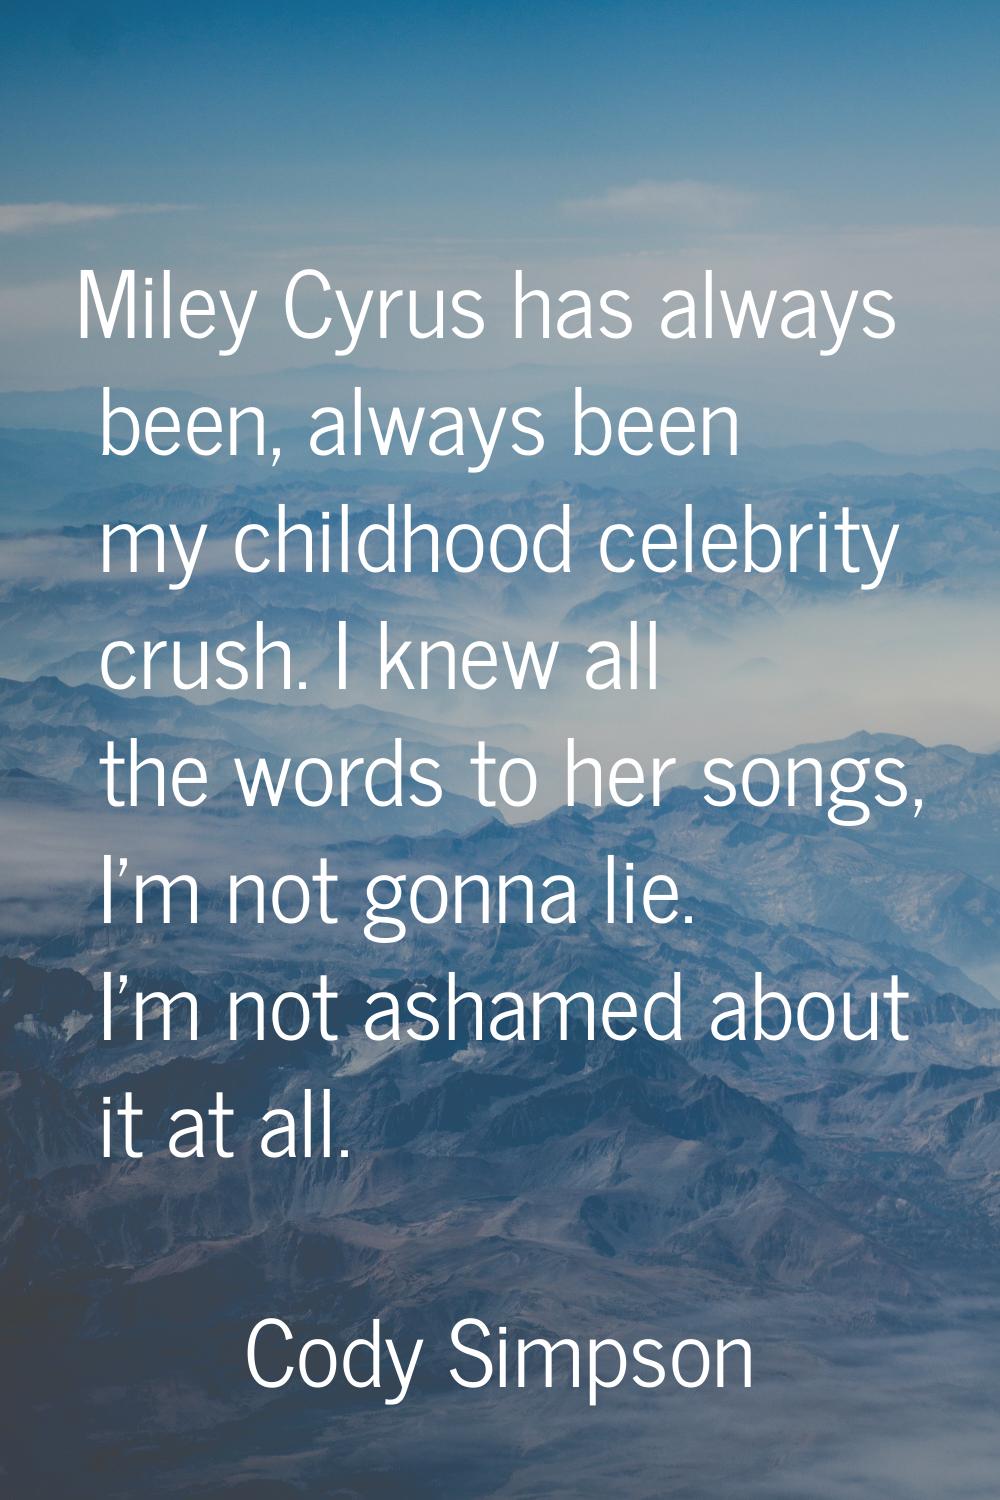 Miley Cyrus has always been, always been my childhood celebrity crush. I knew all the words to her 